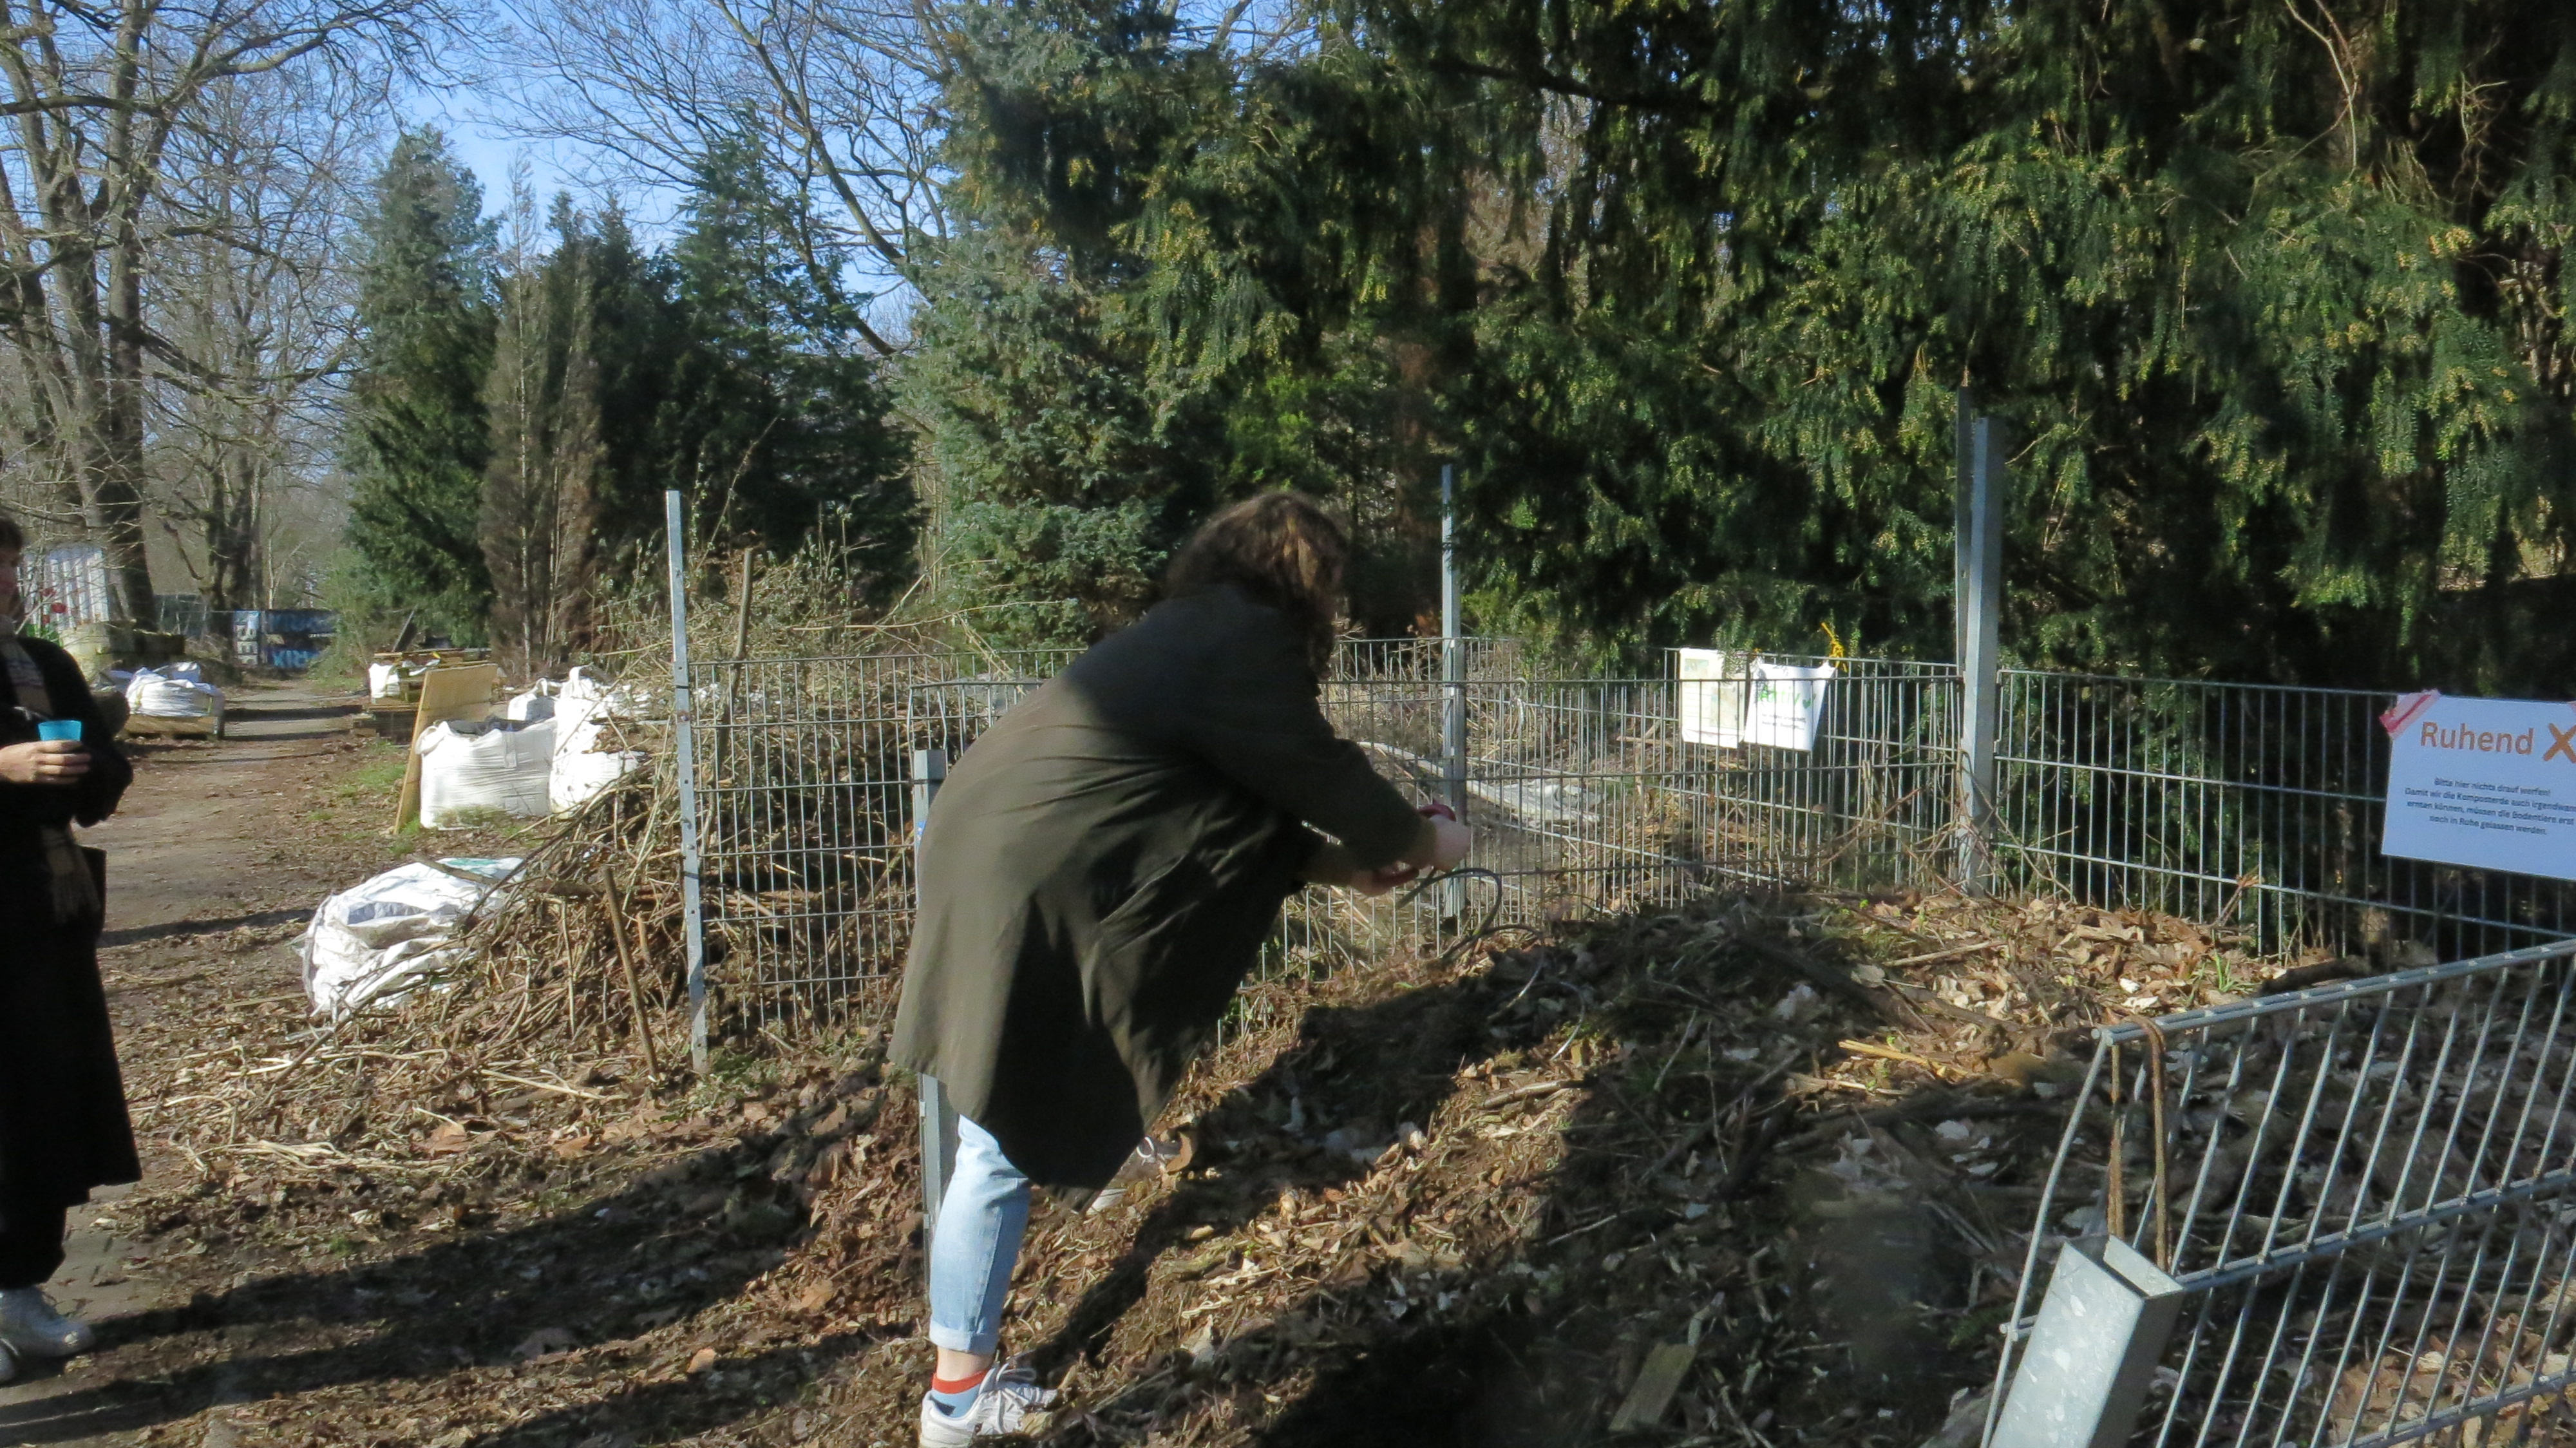 aerating the compost in Berlin